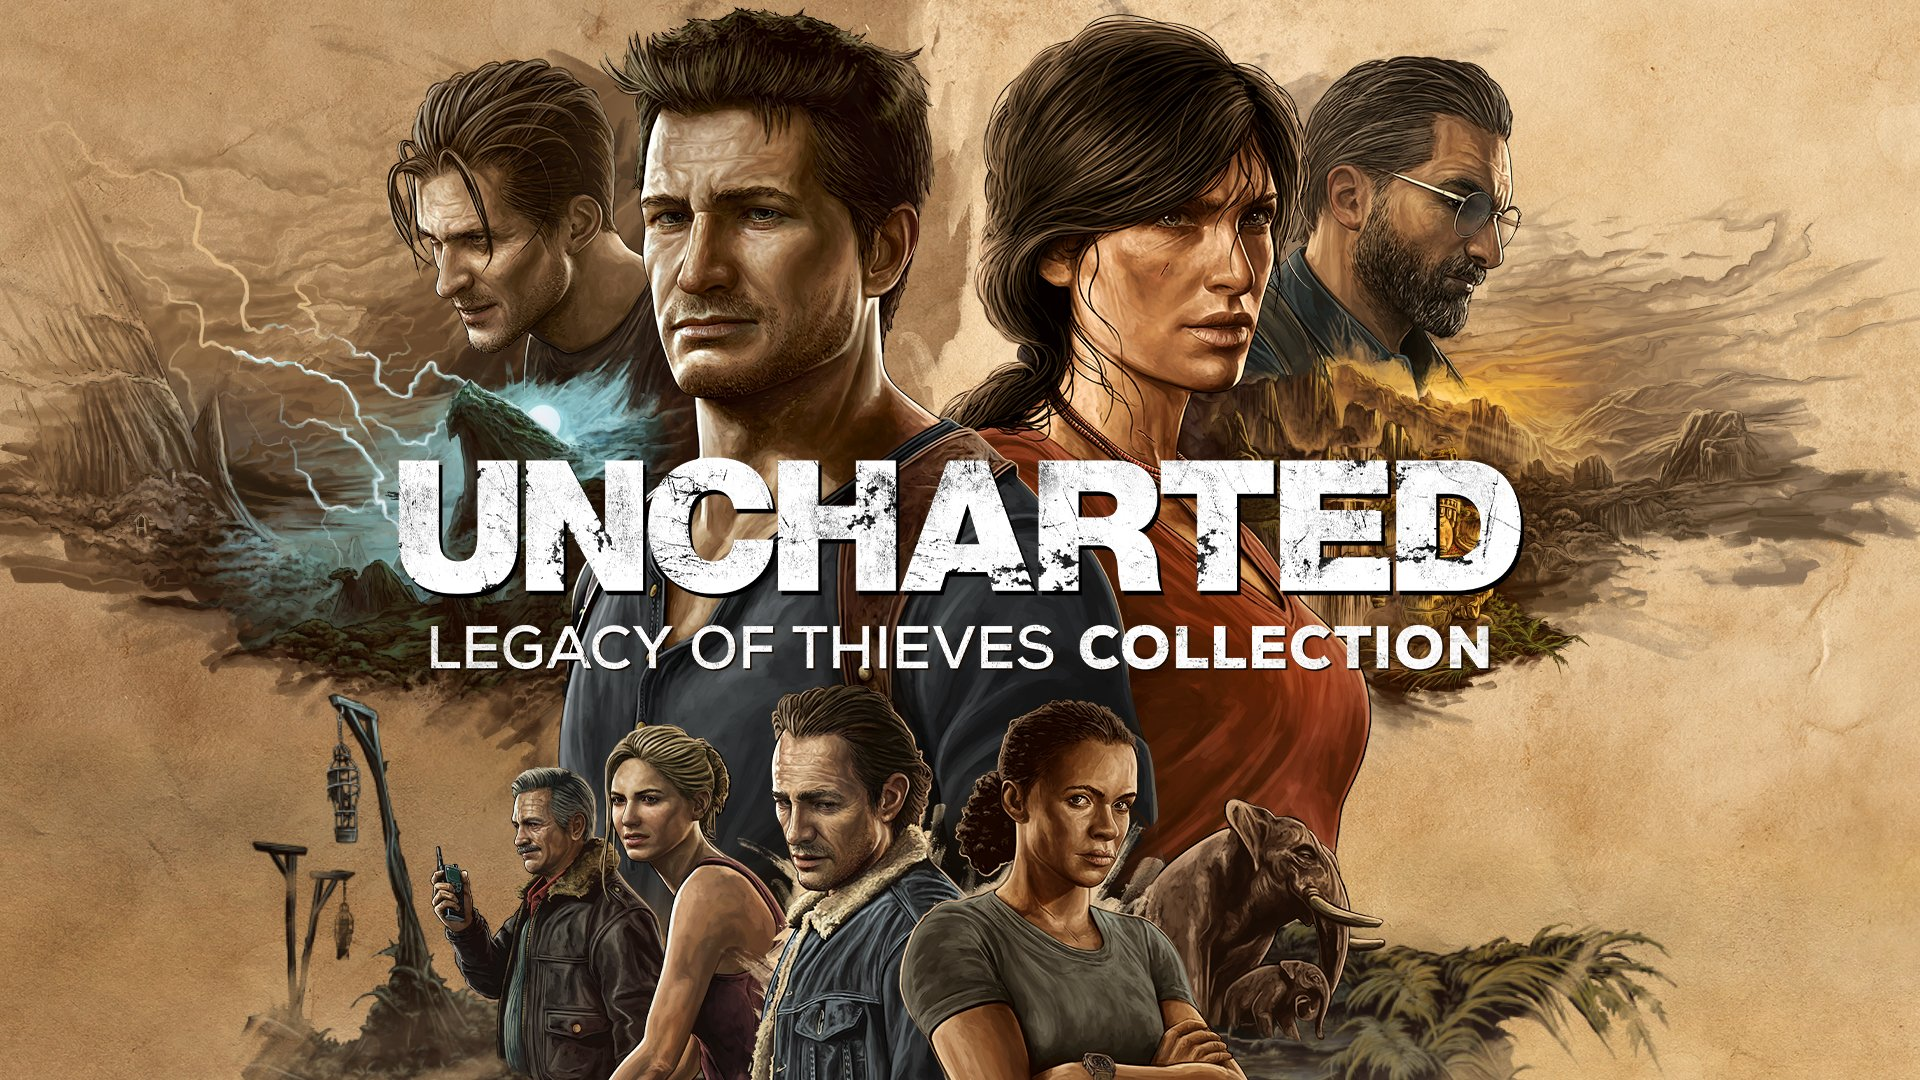 Uncharted Legacy of Thieves Collection + Ö.B.G